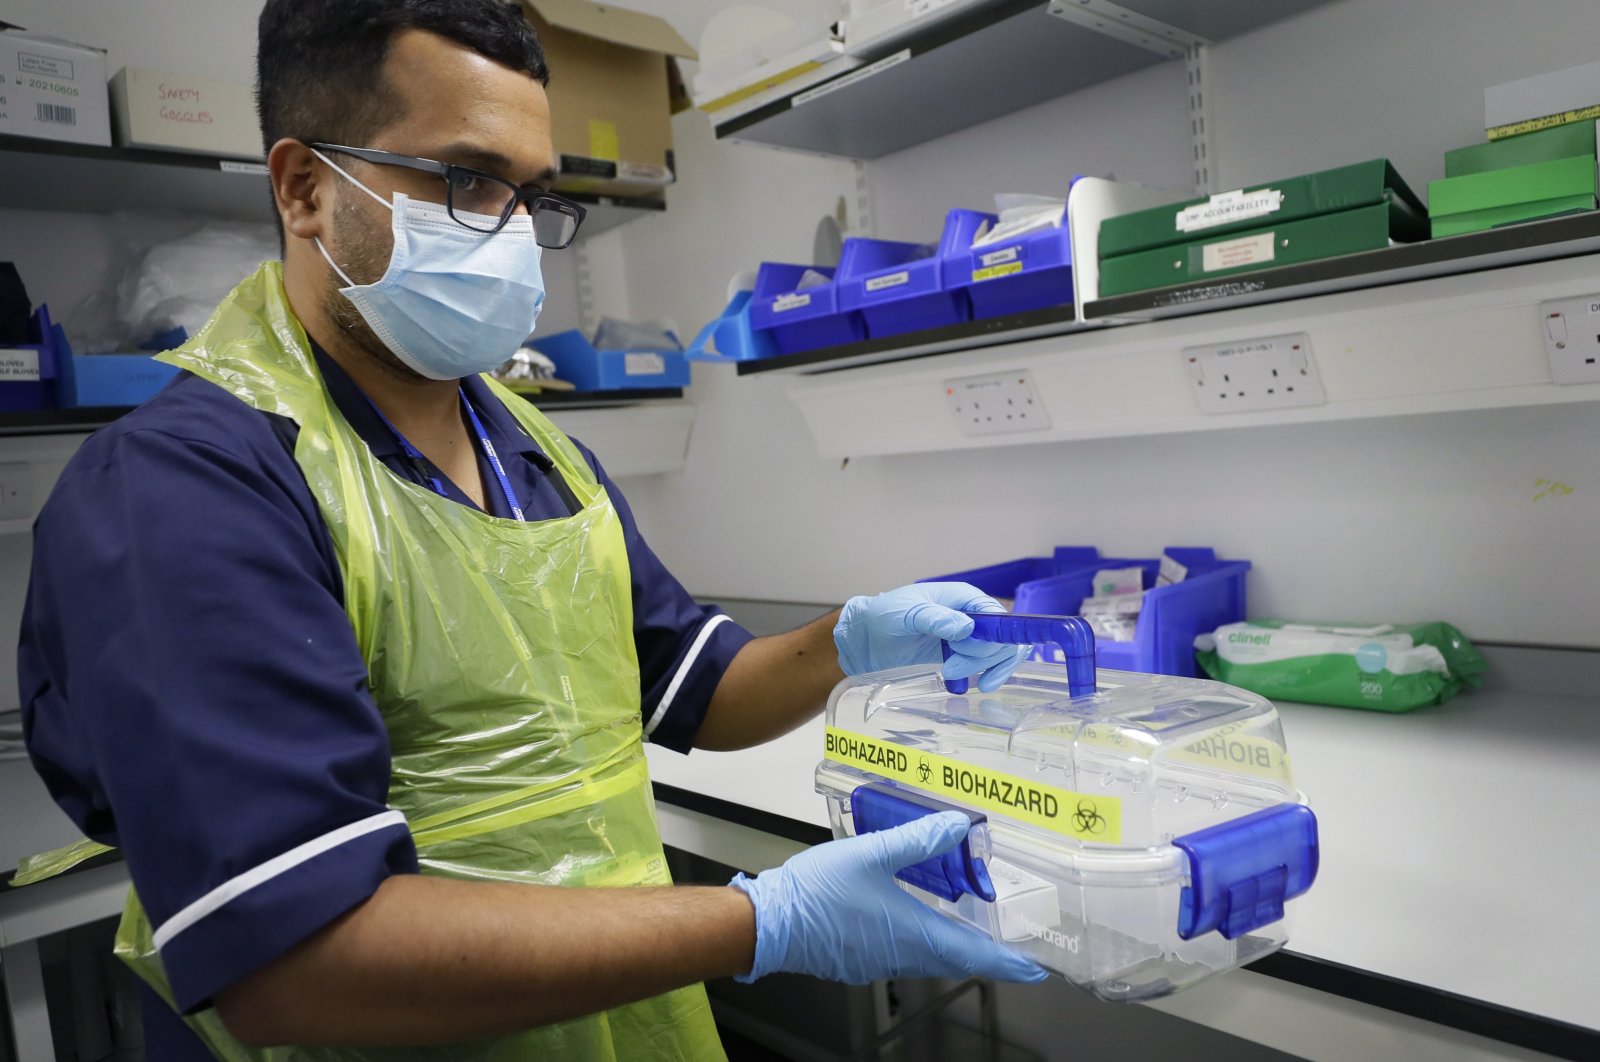 Senior Clinical Research Nurse Ajithkumar Sukumaran carries the vaccine as it is about to be prepared prior to being administered to a volunteer, at a clinic in London, Wednesday, Aug. 5, 2020. (AP Photo)